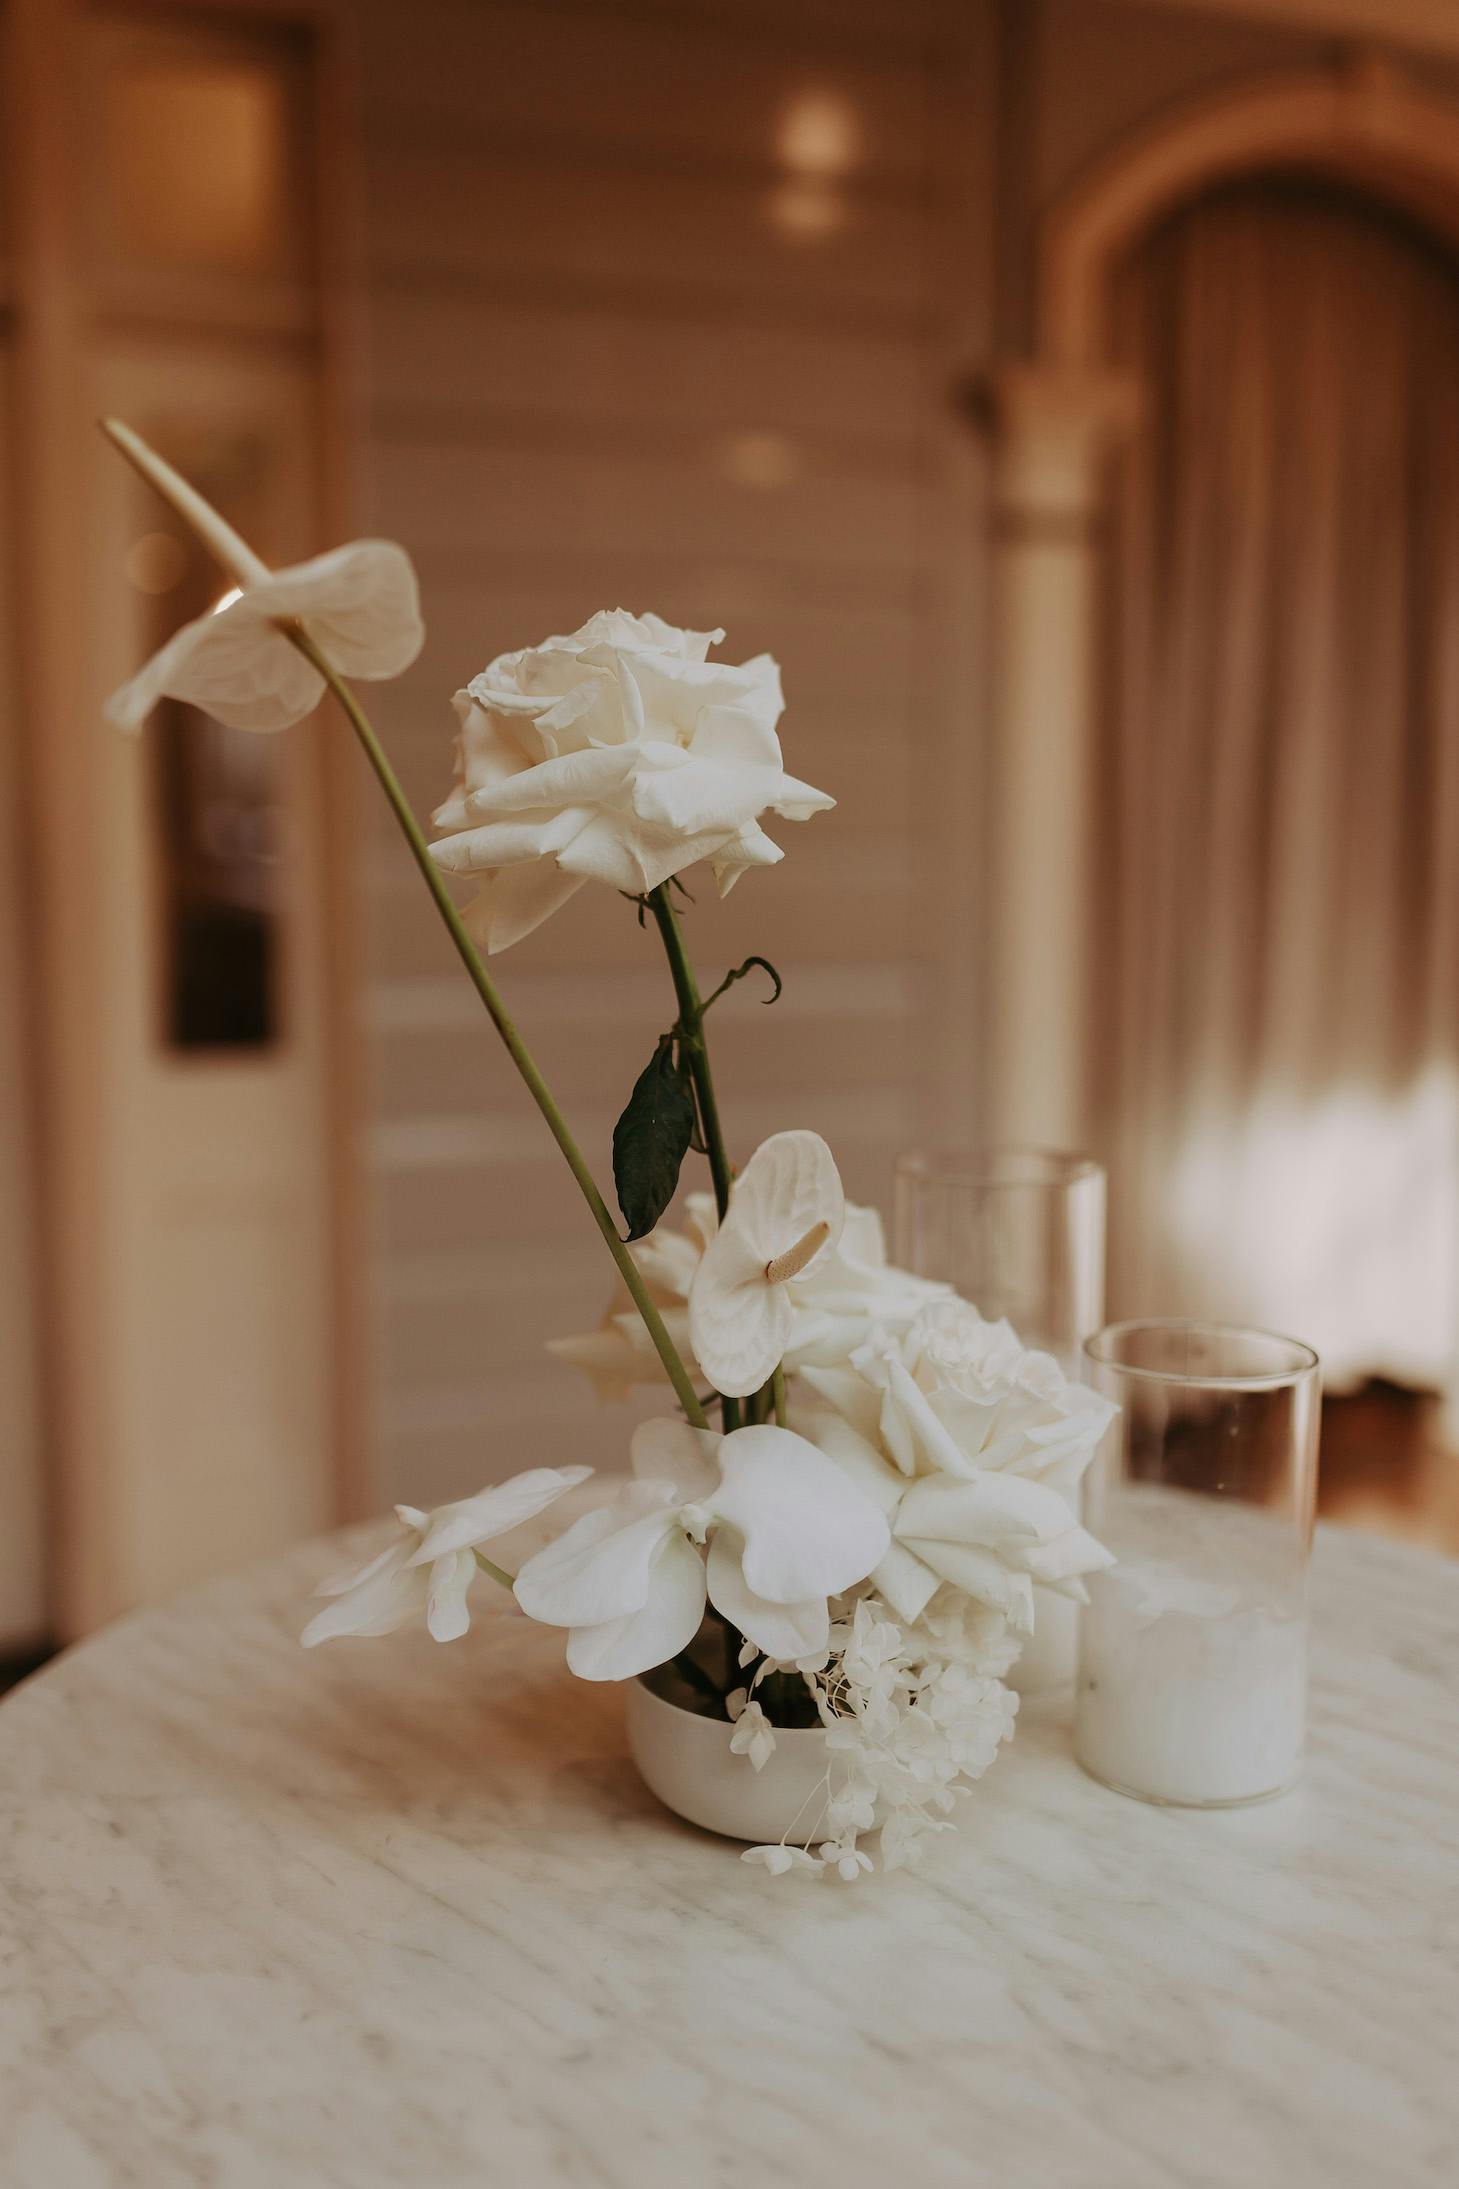 A small floral arrangement sits on a marble table, featuring white roses, white anthuriums, and other white flowers. Two glass candle holders, each containing a white candle, are positioned next to the floral display. The background shows part of an elegant room.